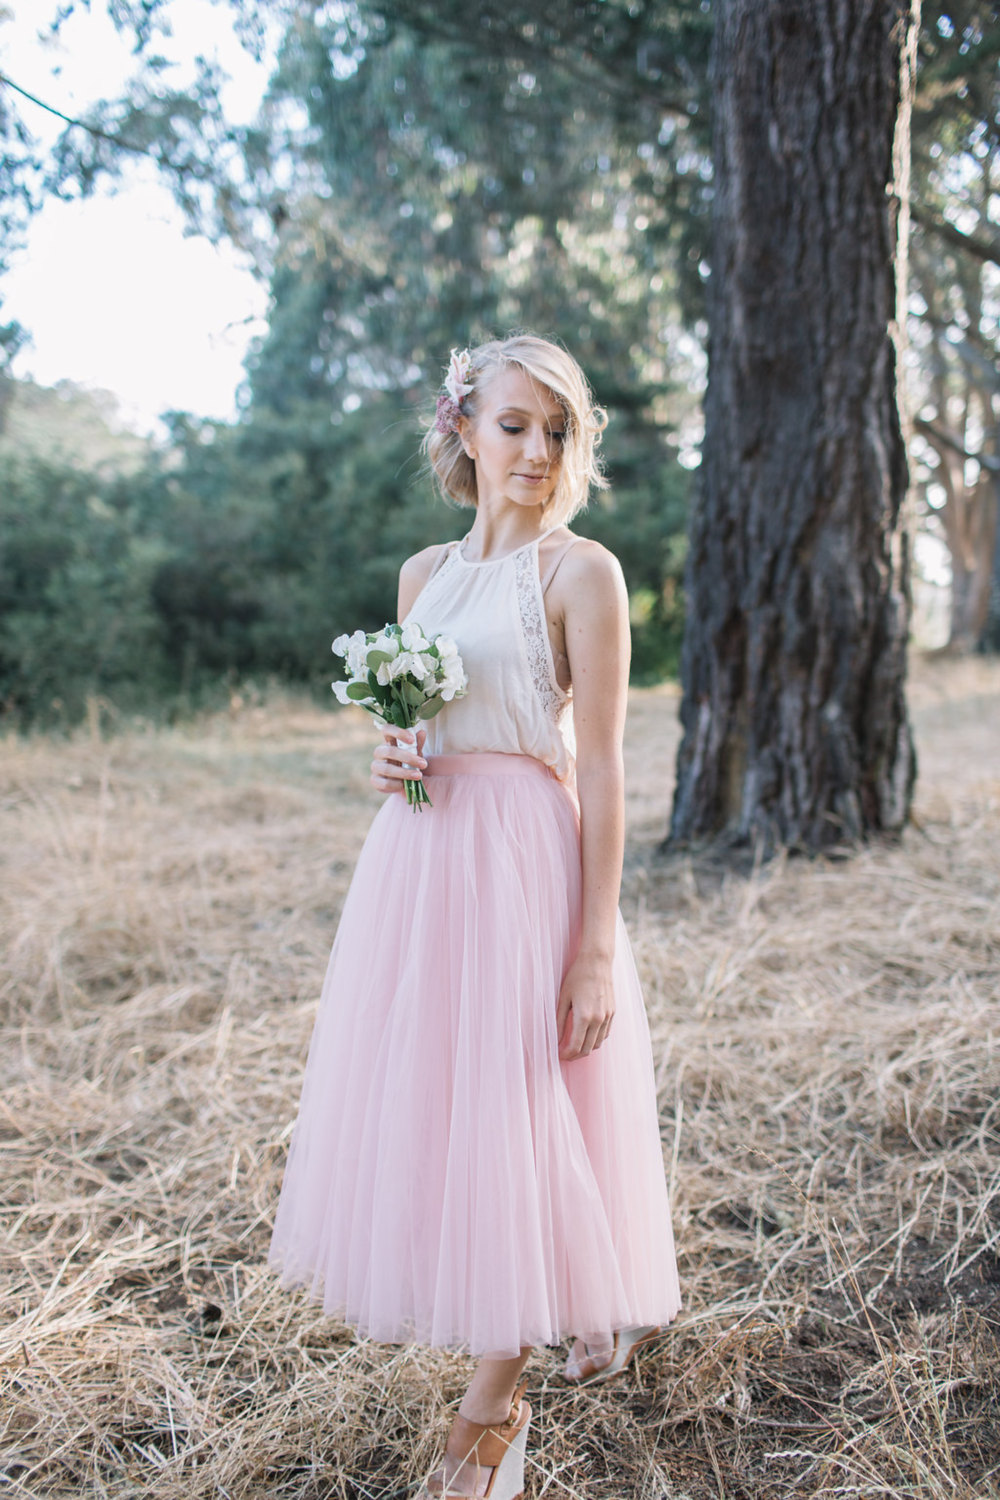 12 Drop-Dead Gorgeous Tulle Skirts for Your Bridesmaids